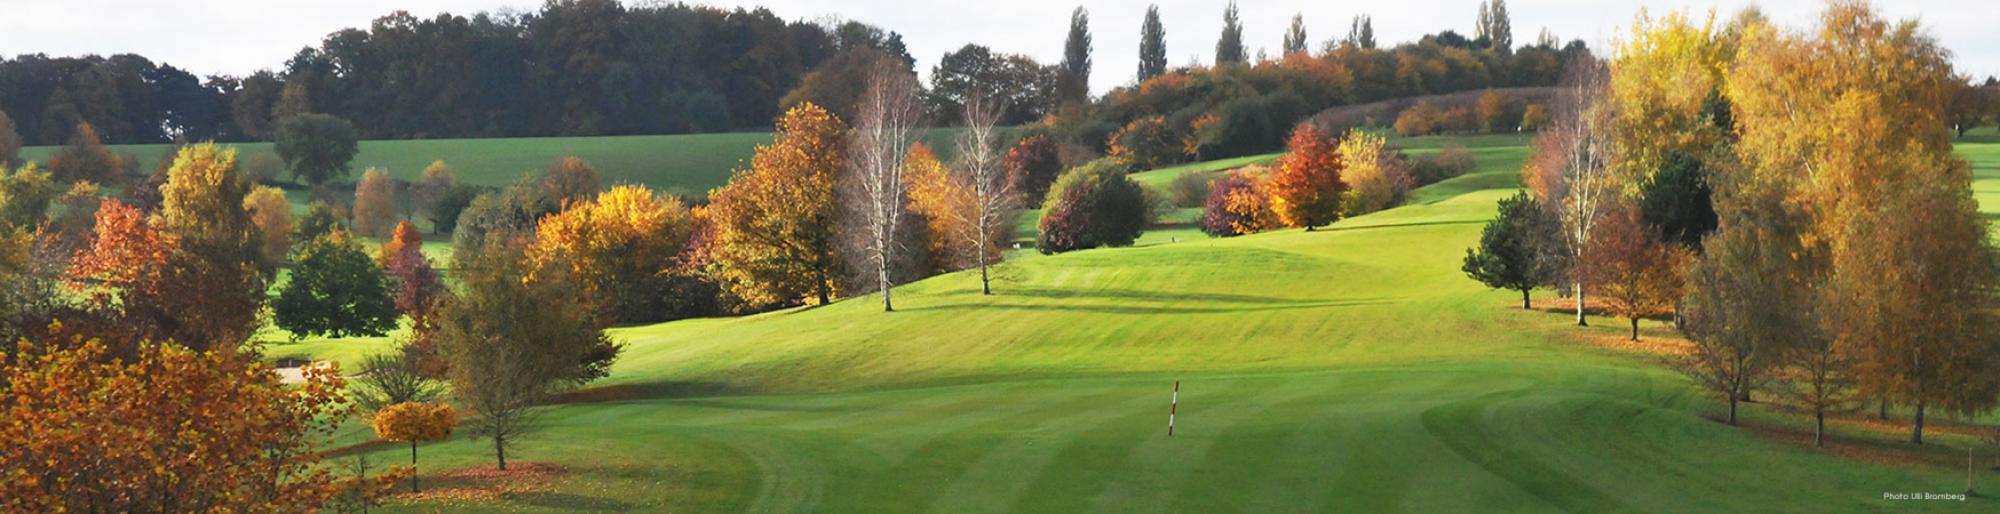 Golf L Empereur has got several of the preferred golf course around Brussels Waterloo & Mons